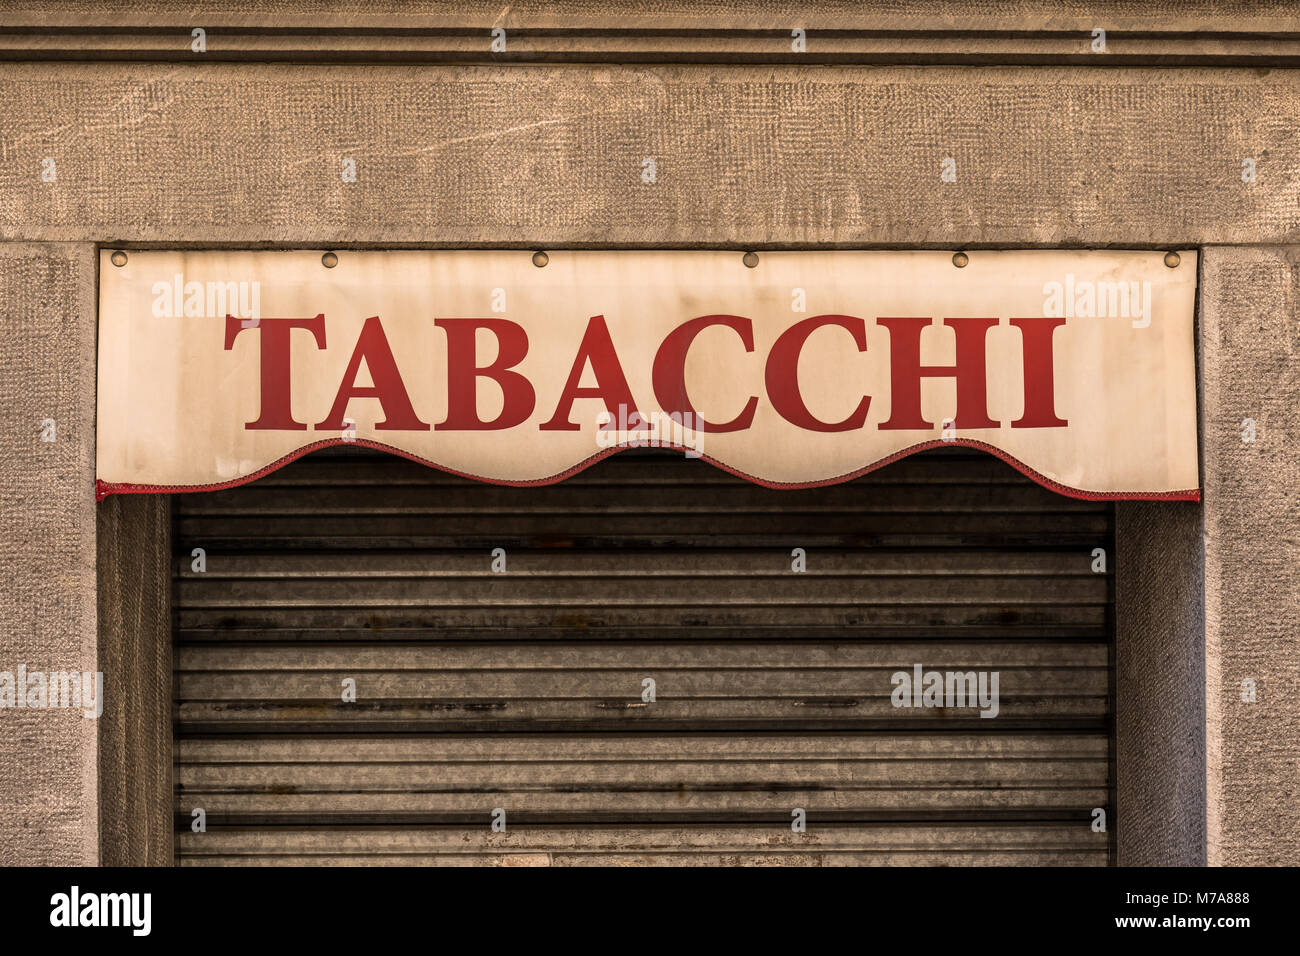 Tabacchi store detail, Italy Stock Photo